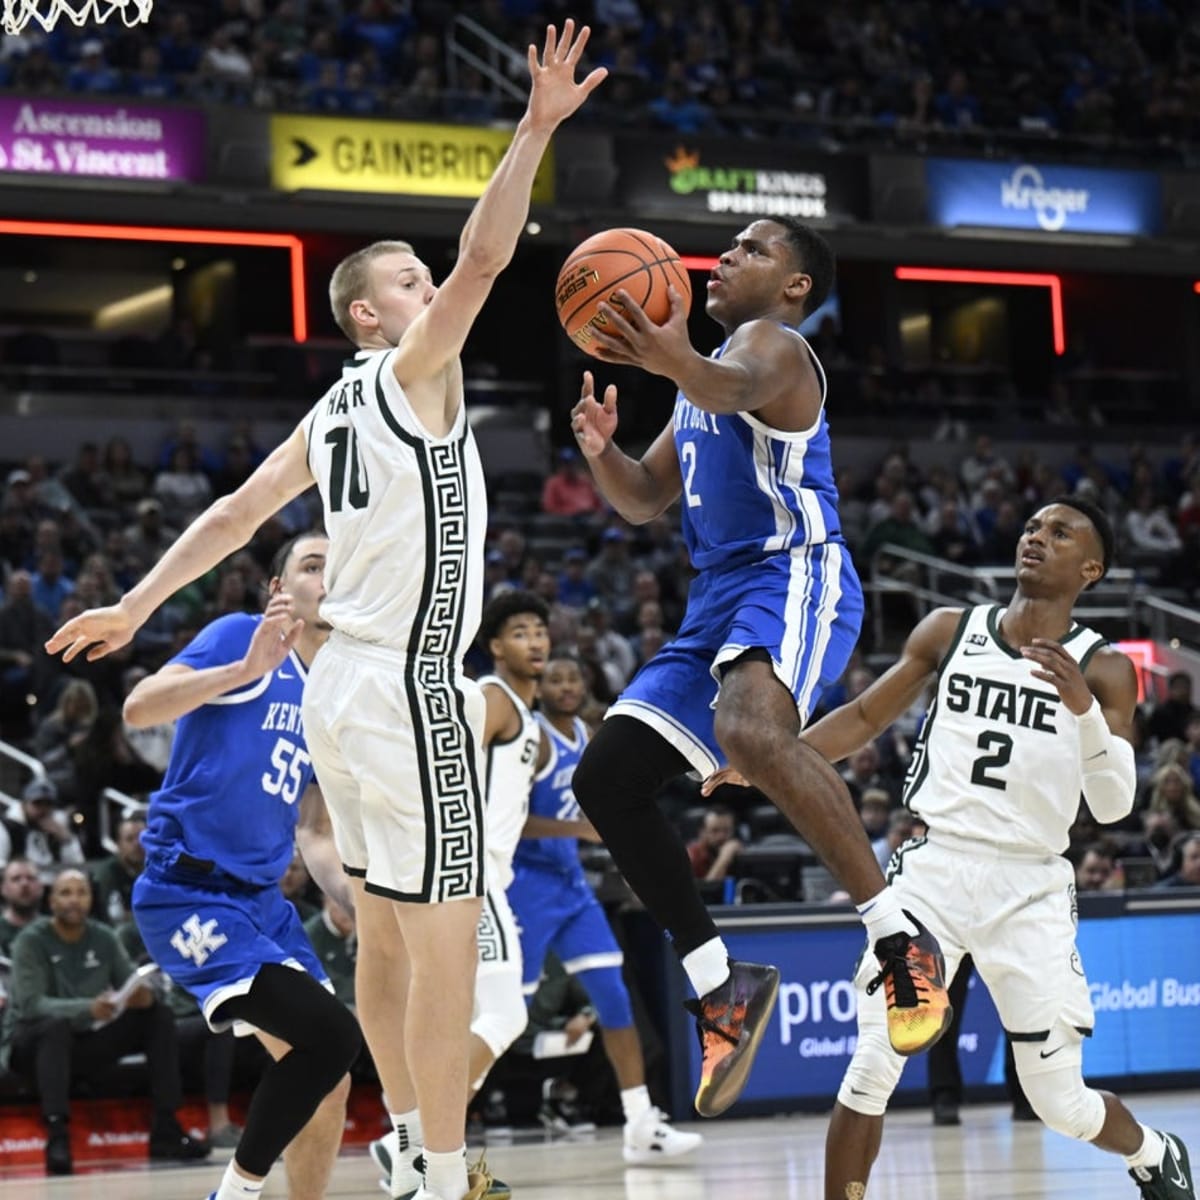 UNC-Wilmington at Kentucky Free Live Stream College Basketball - How to Watch and Stream Major League and College Sports